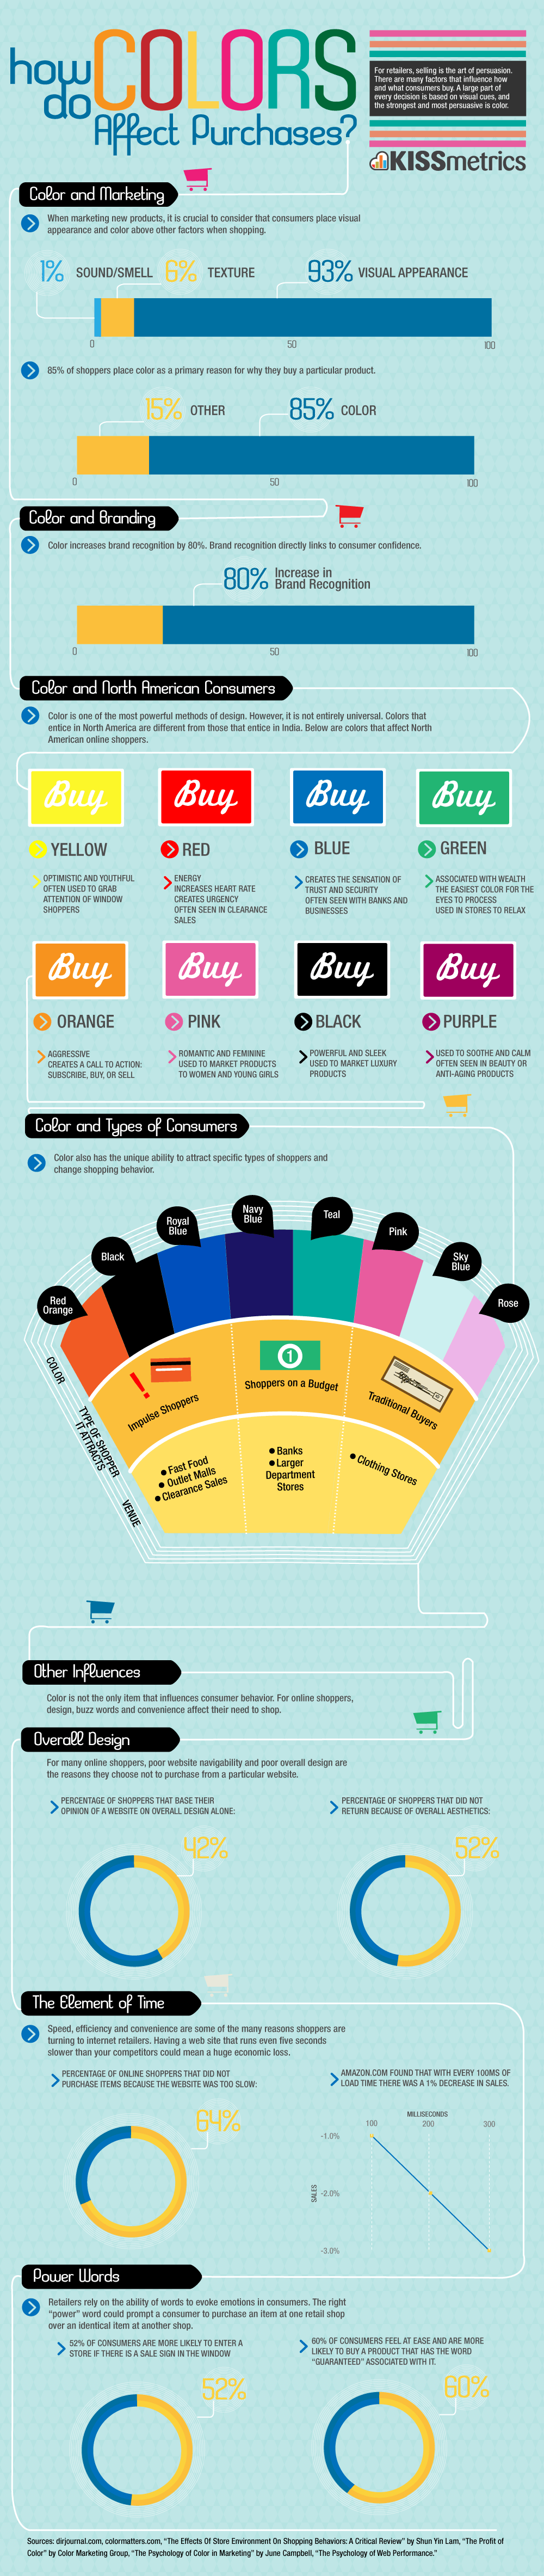 How do colors affect purchases? Infographic